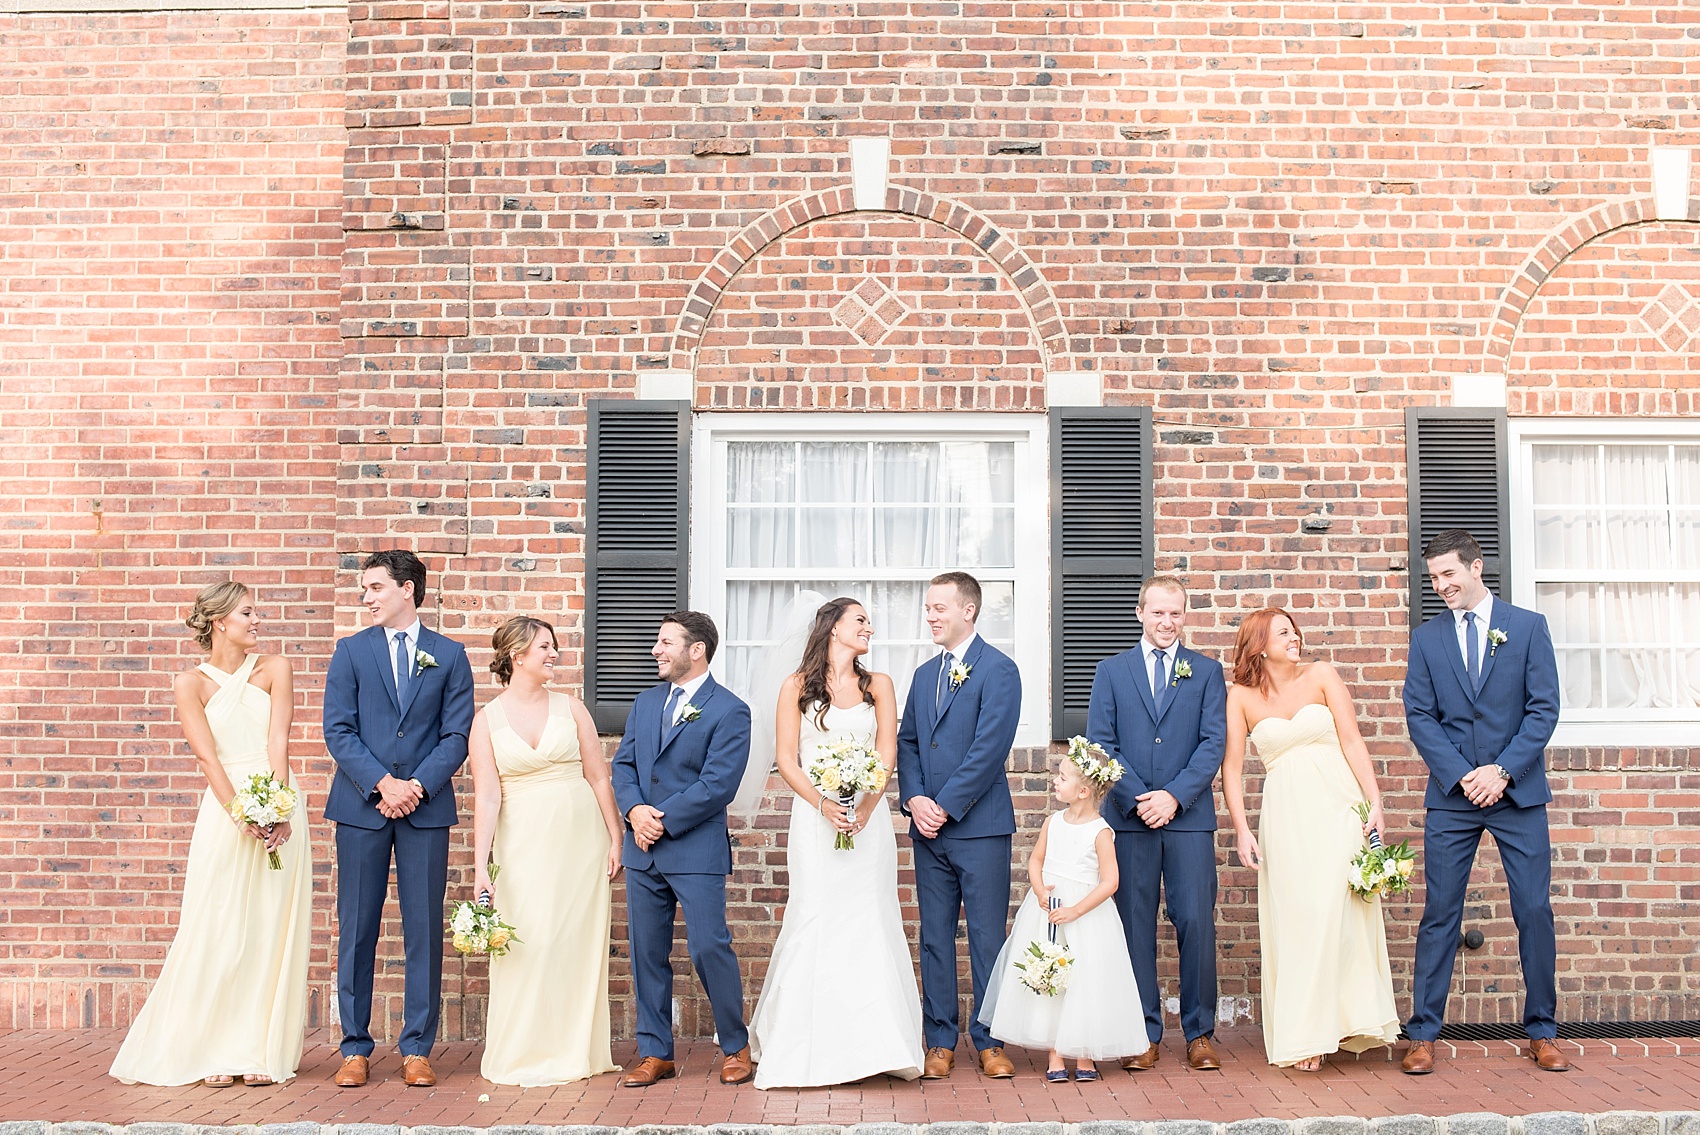 Wedding party in navy blue suits and yellow chiffon dresses for the groomsmen and bridesmaids in New Jersey for this nautical wedding at the Molly Pitcher Inn. Photo by Mikkel Paige Photography.